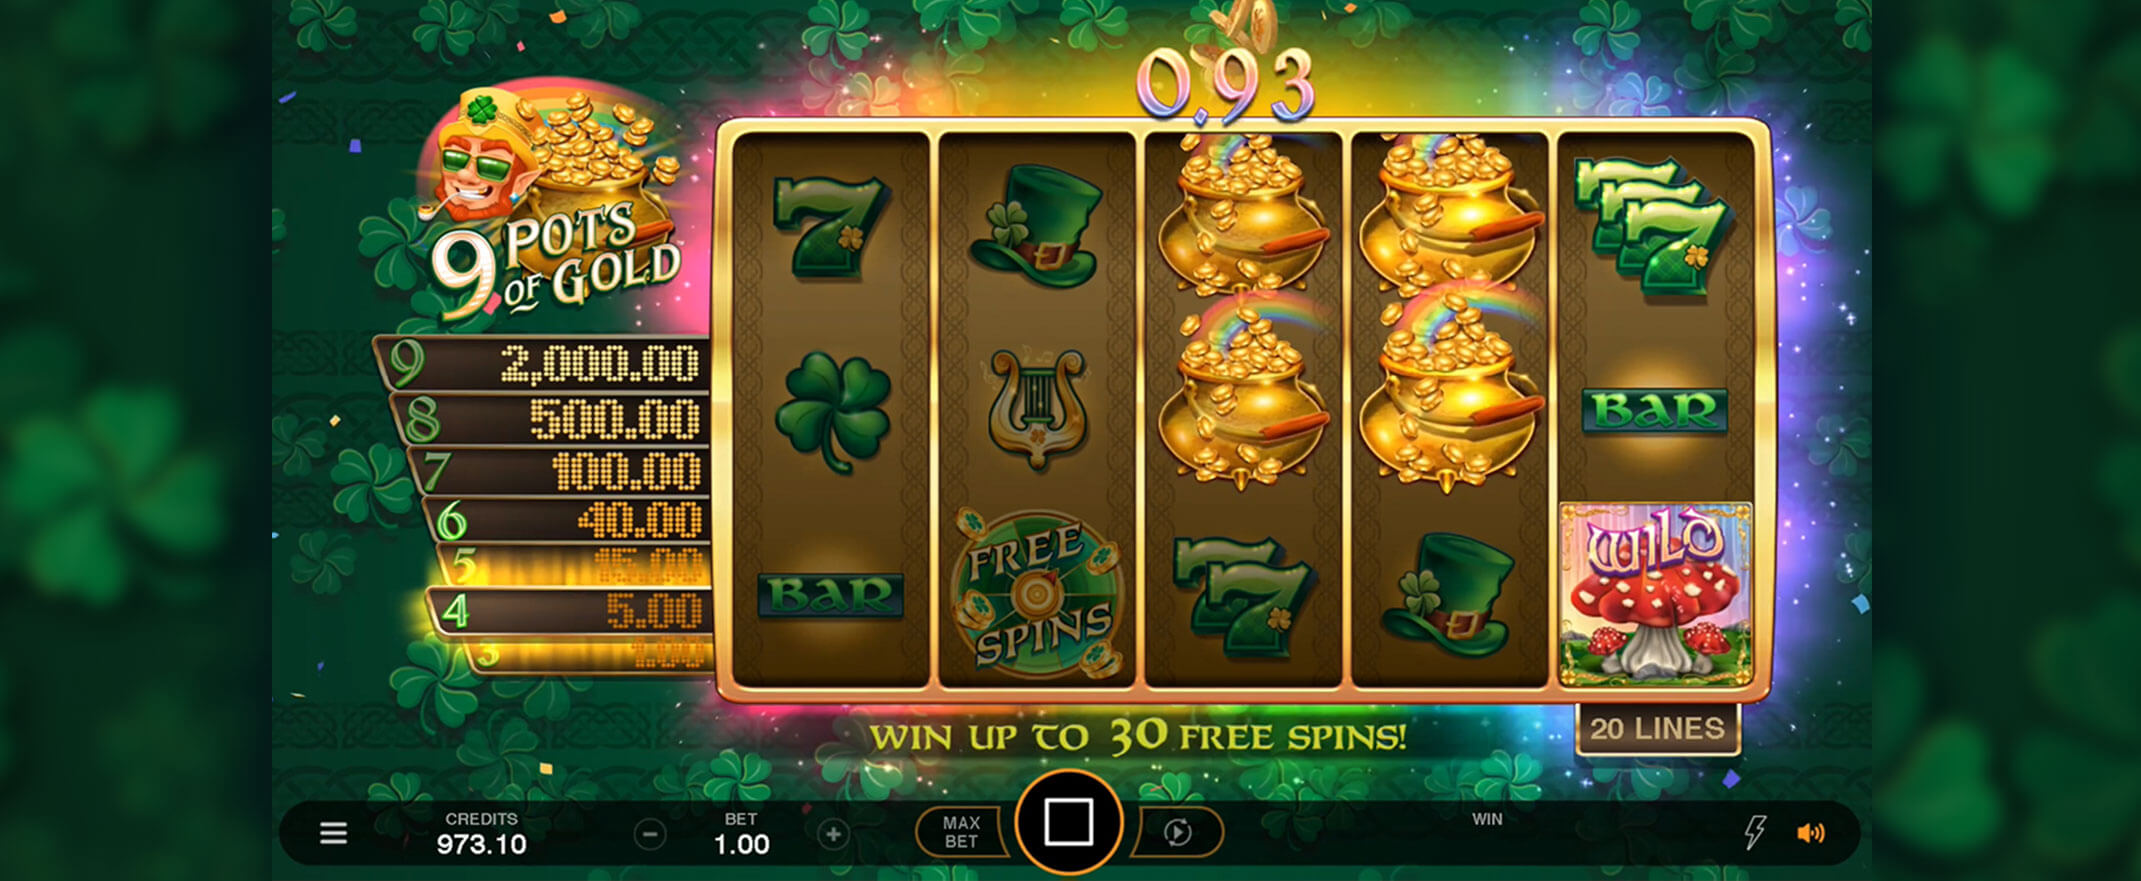 9 Pots of Gold Slot Review, image of the reels and symbols